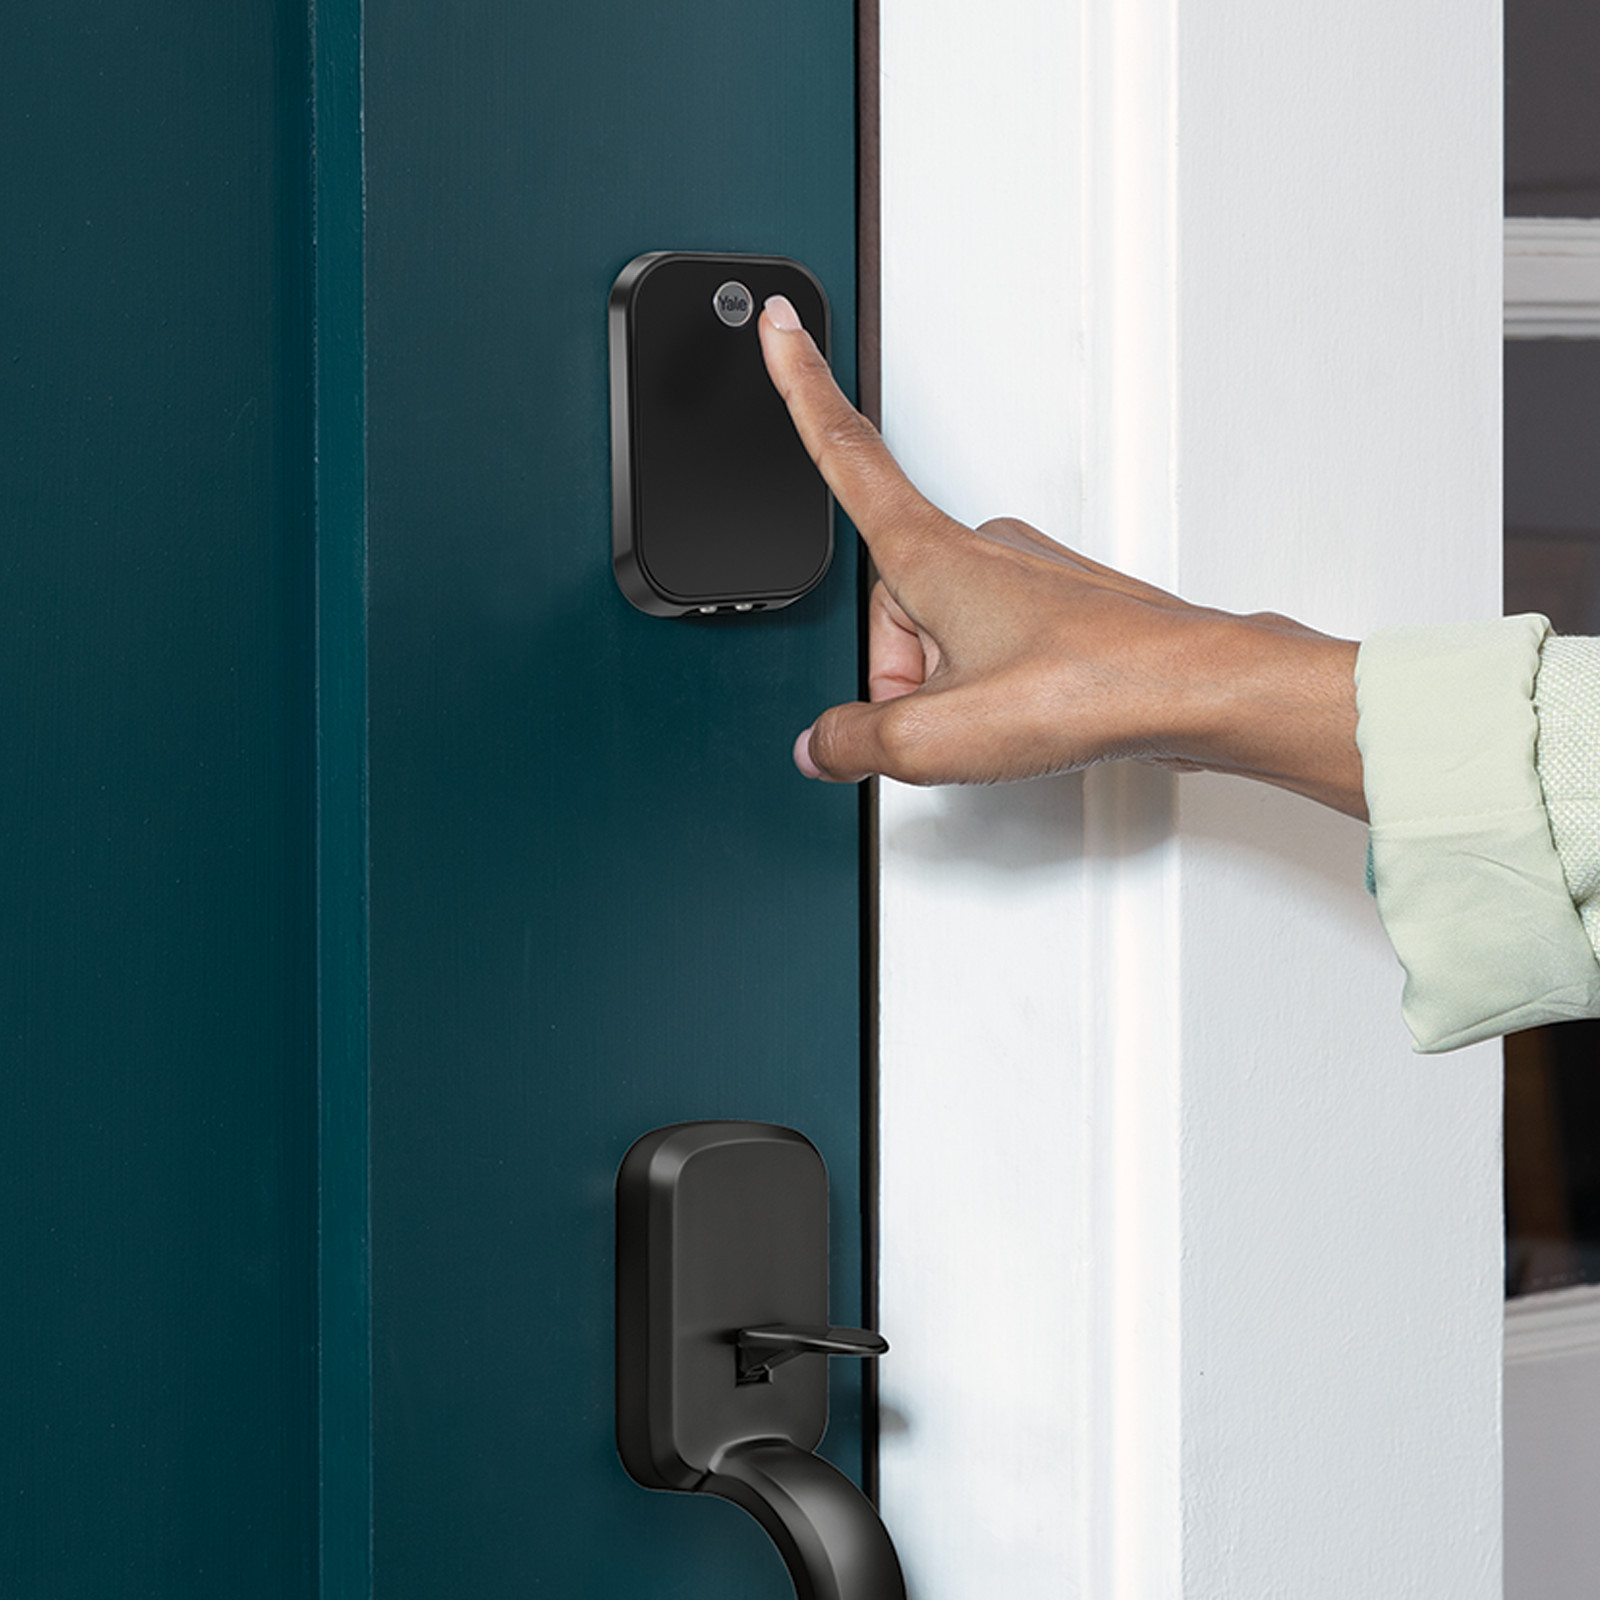 Yale Assure Lock 2 Touch with Wi-Fi - Key Free